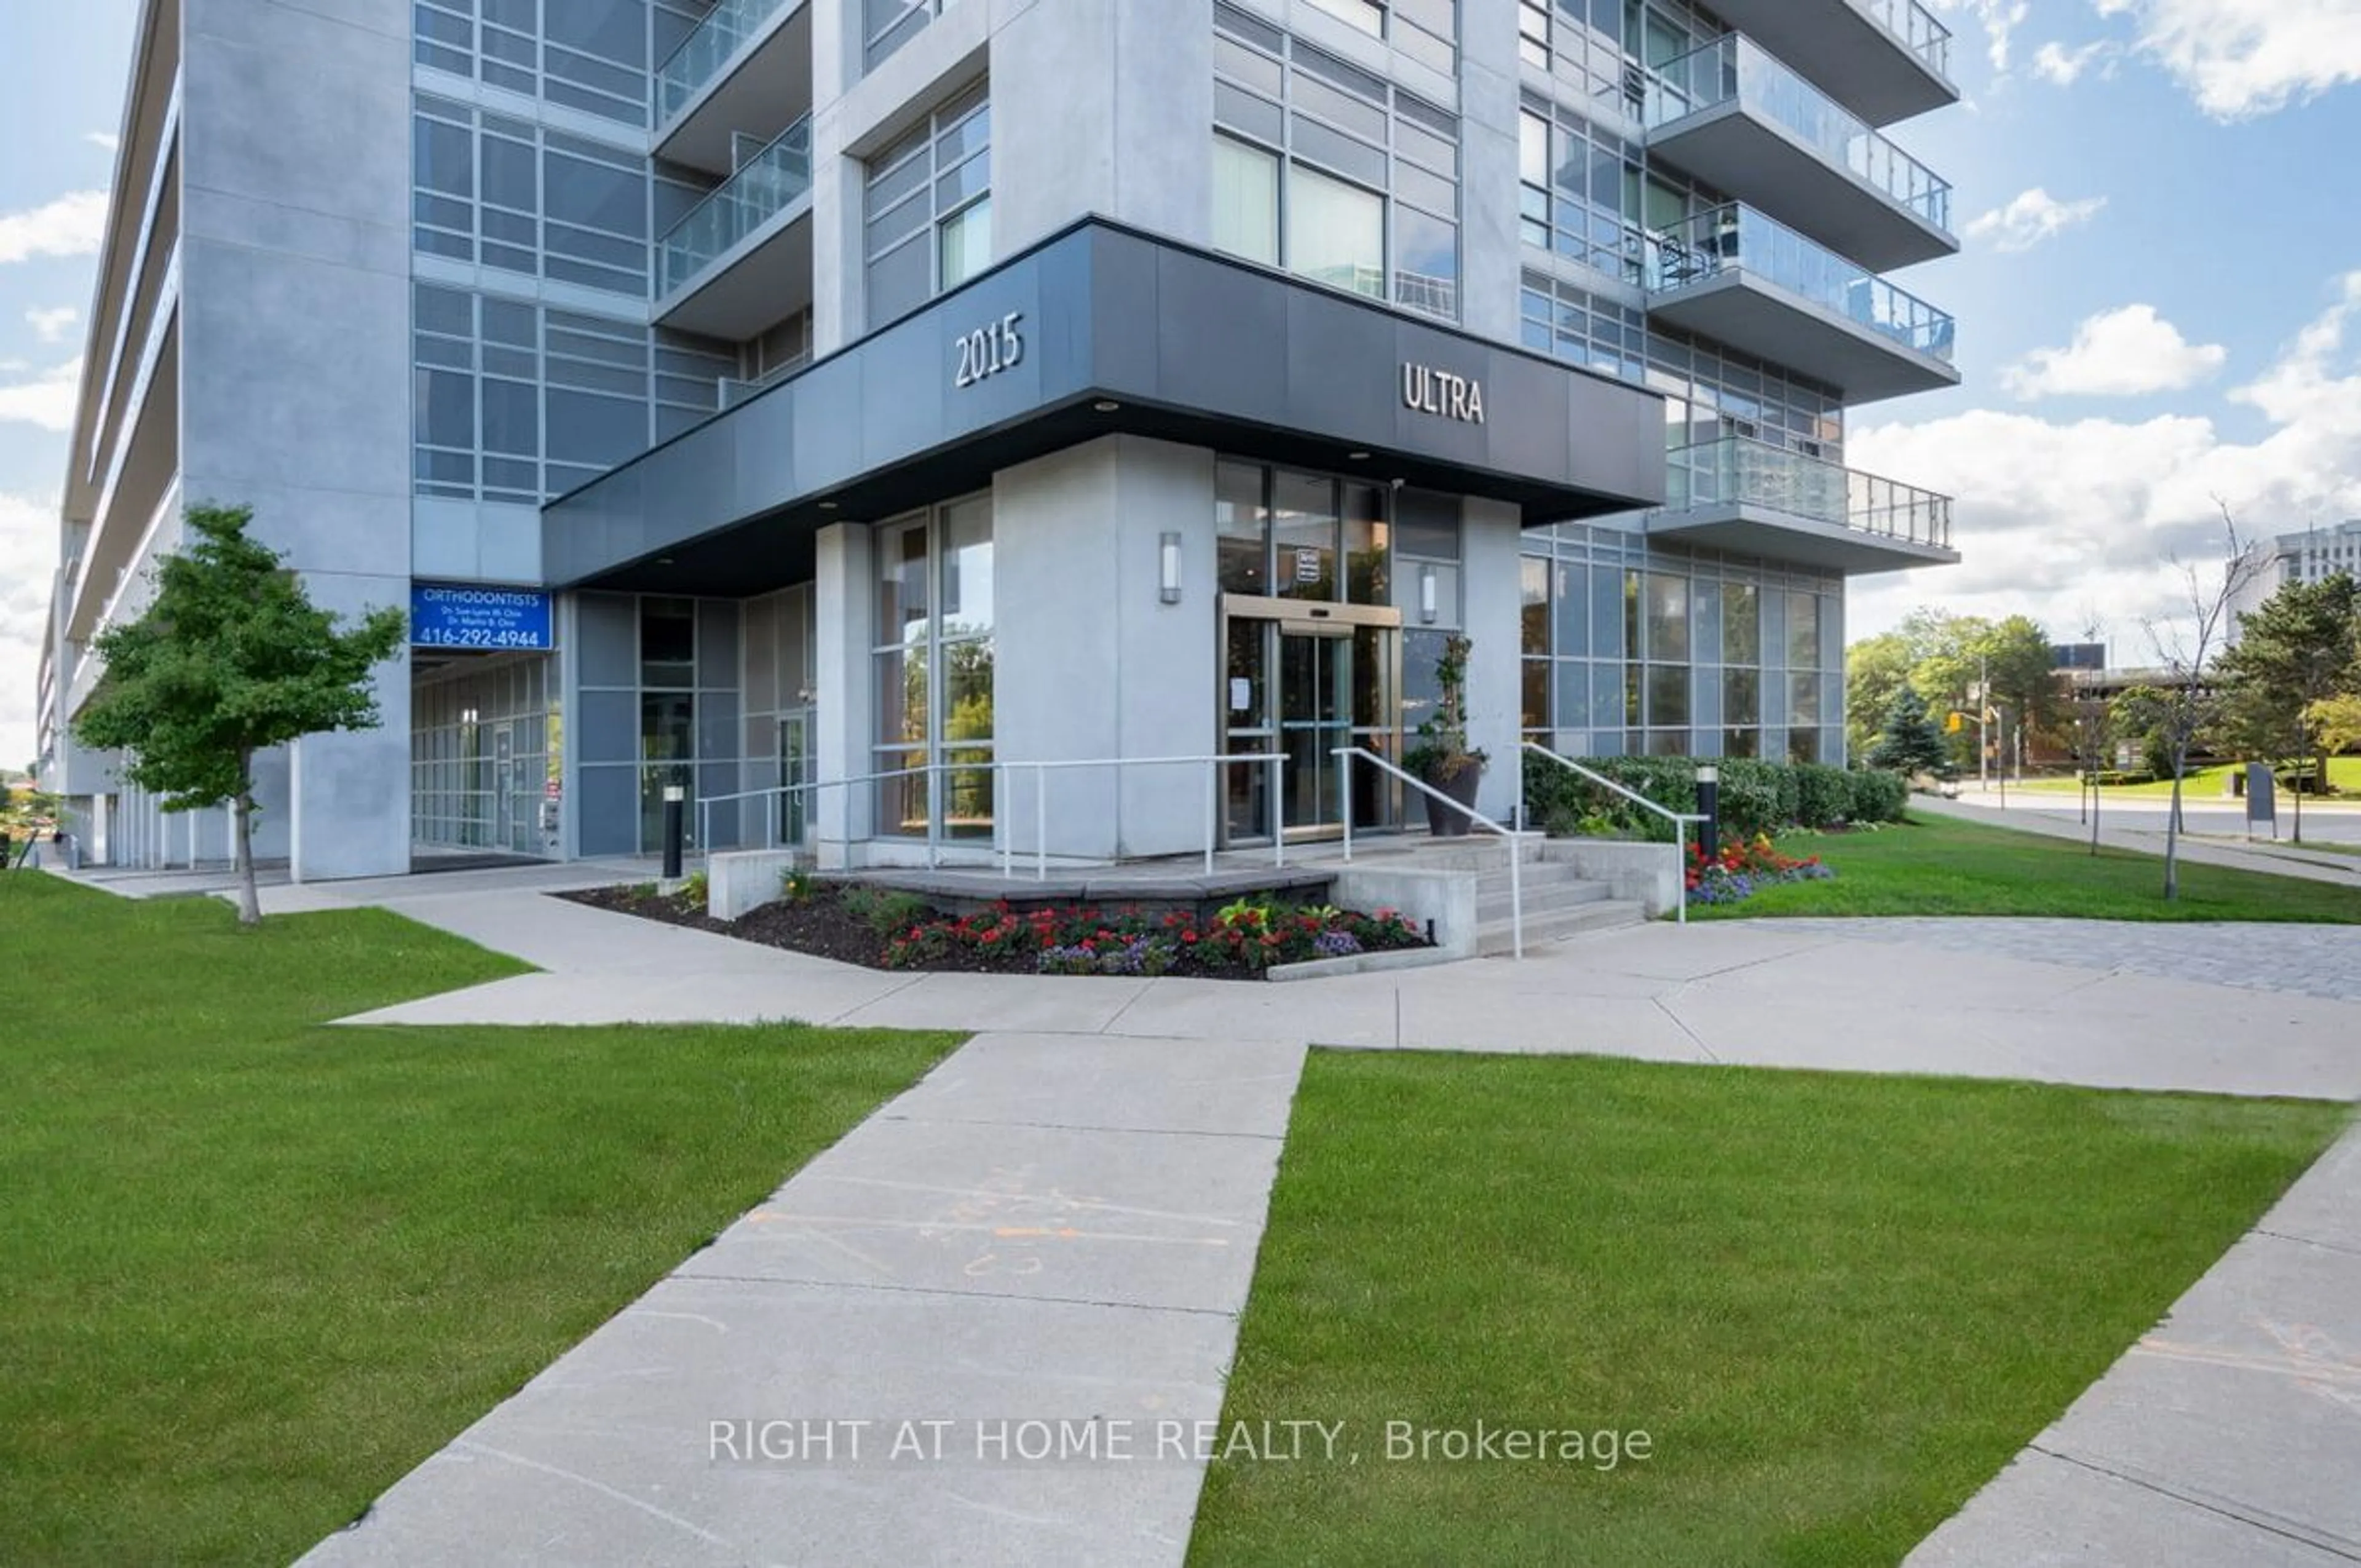 A pic from exterior of the house or condo for 2015 Sheppard Ave #1111, Toronto Ontario M2J 1W6